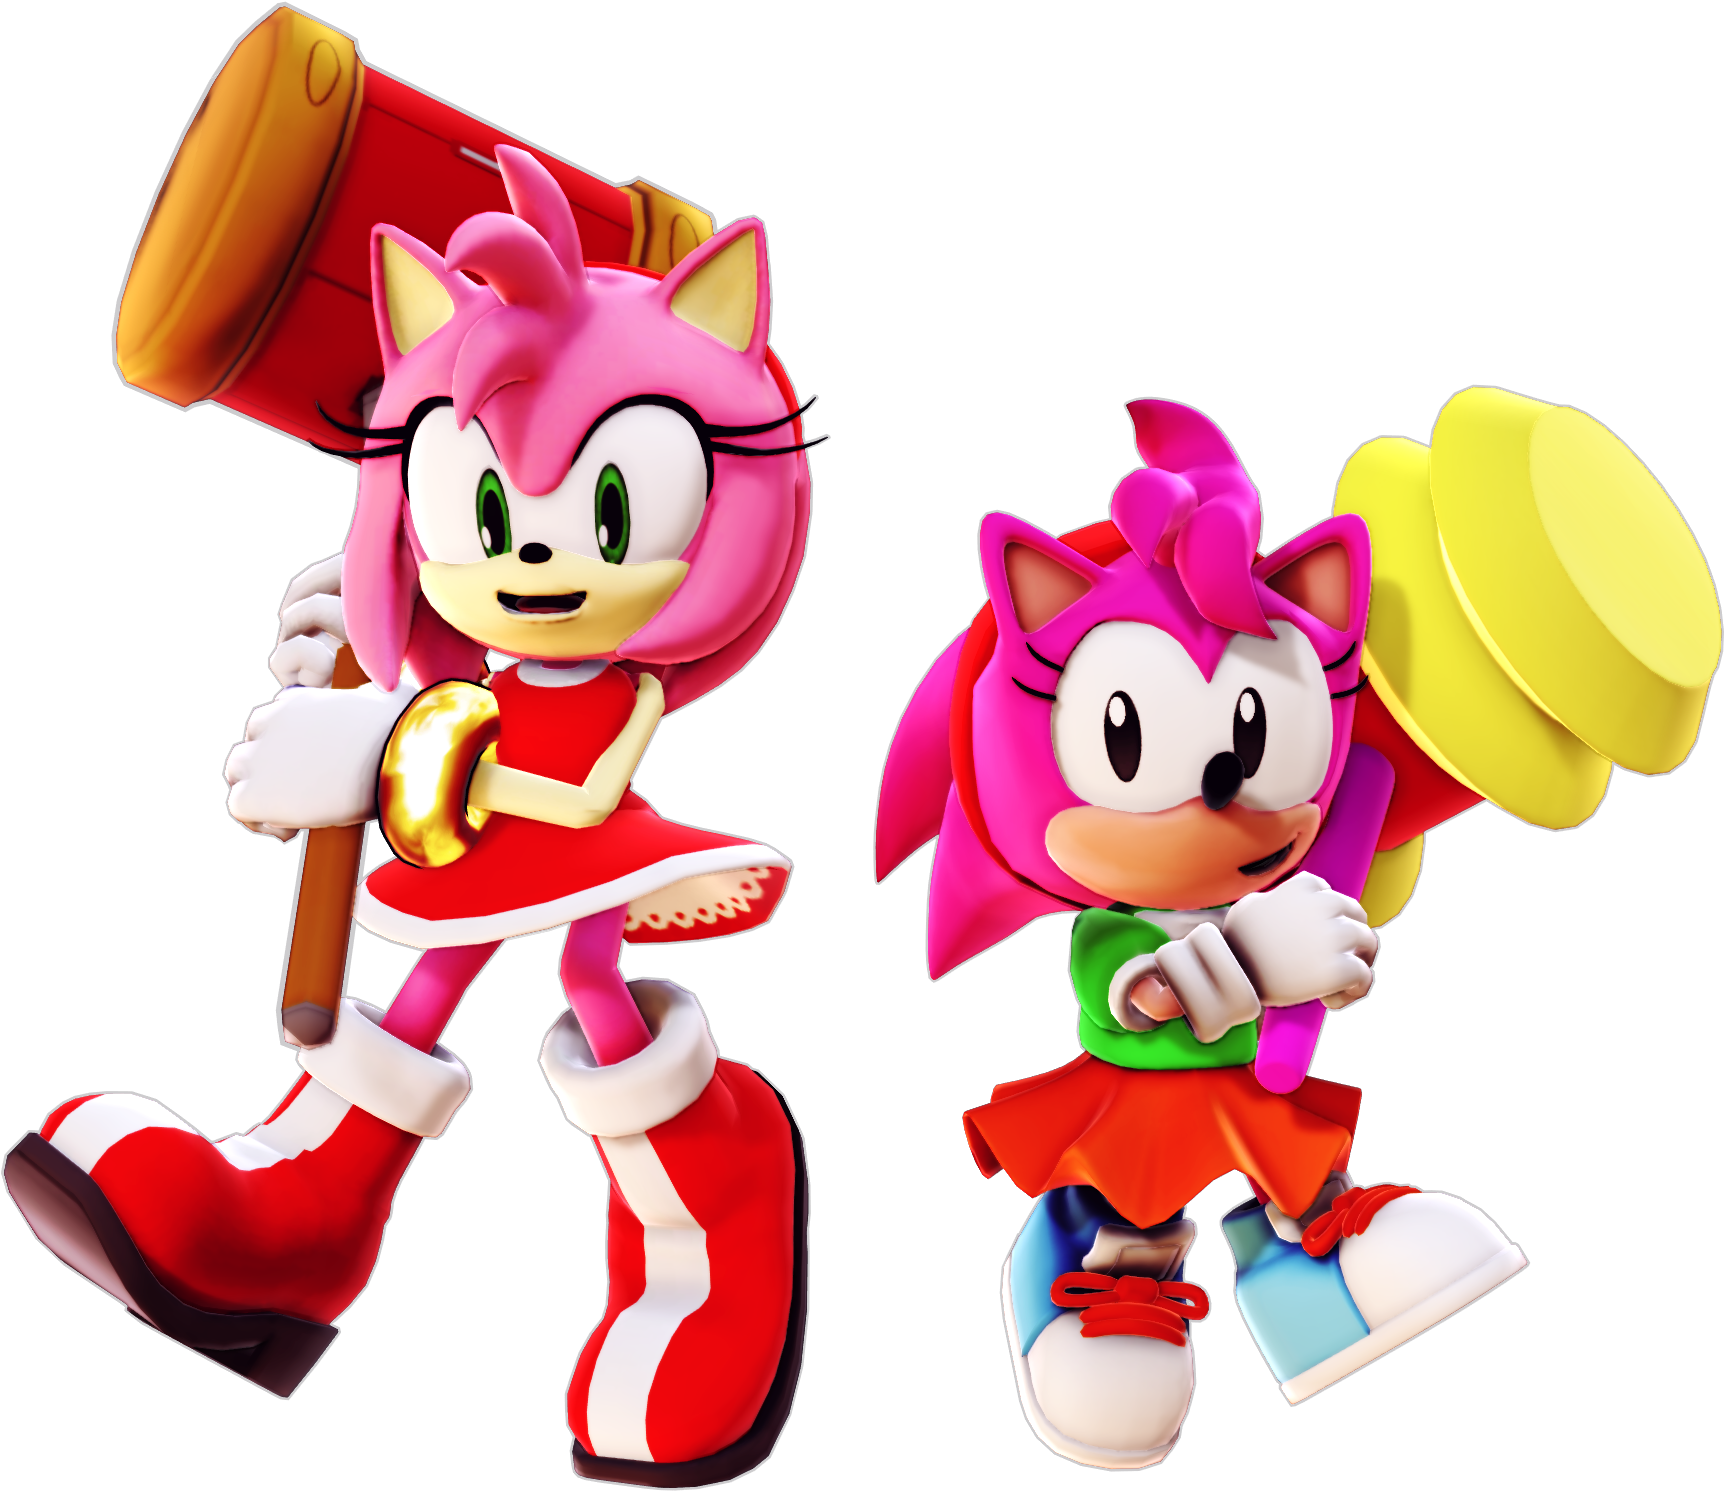 Mmd Galaxias By Dec0rum On Deviantart - Amy Rose Rosy The Rascal (2000x1500)